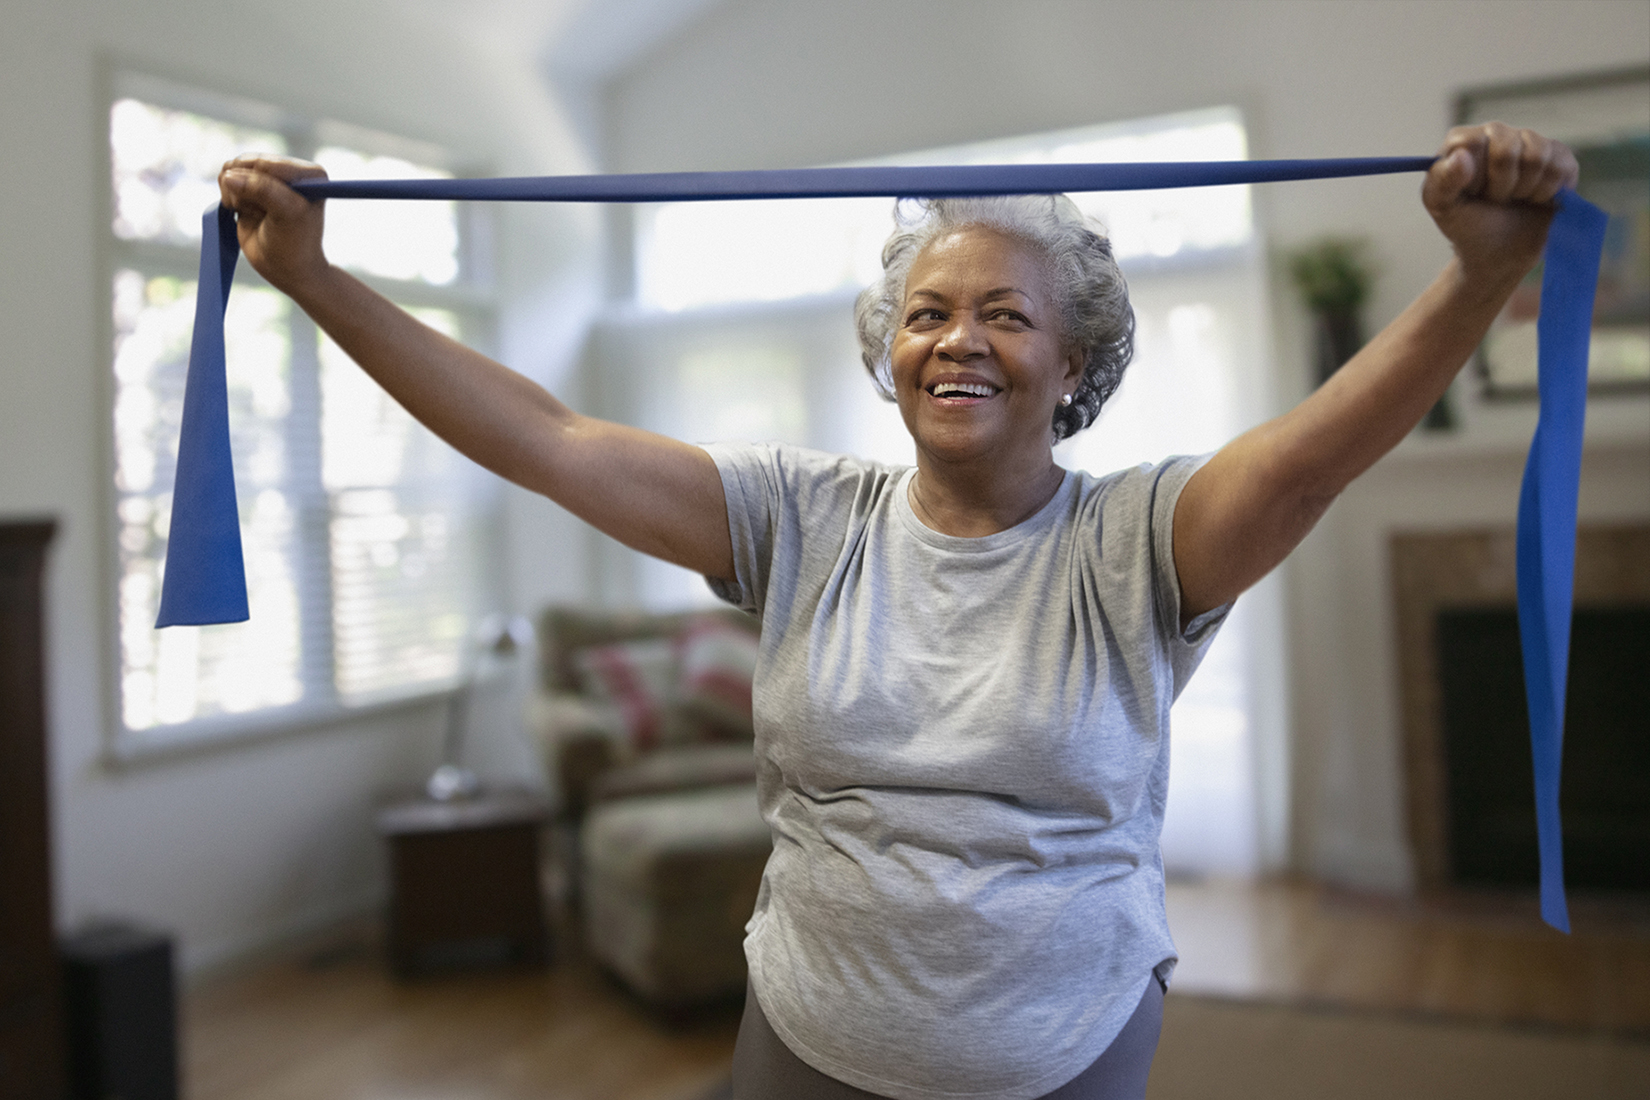 Exercises for older adults: what you need to know